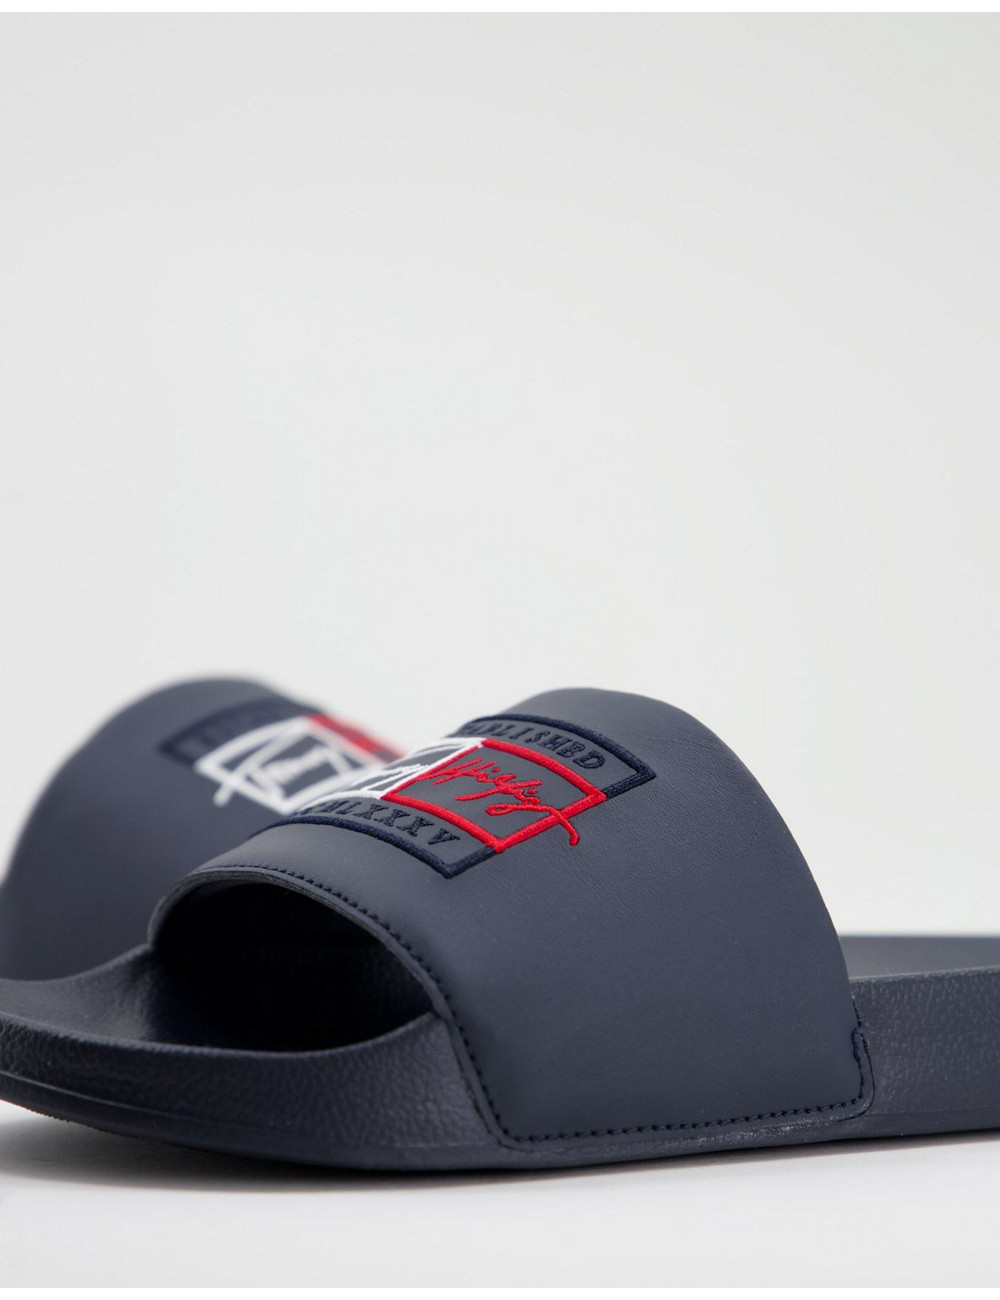 Tommy Hilfiger sliders with...